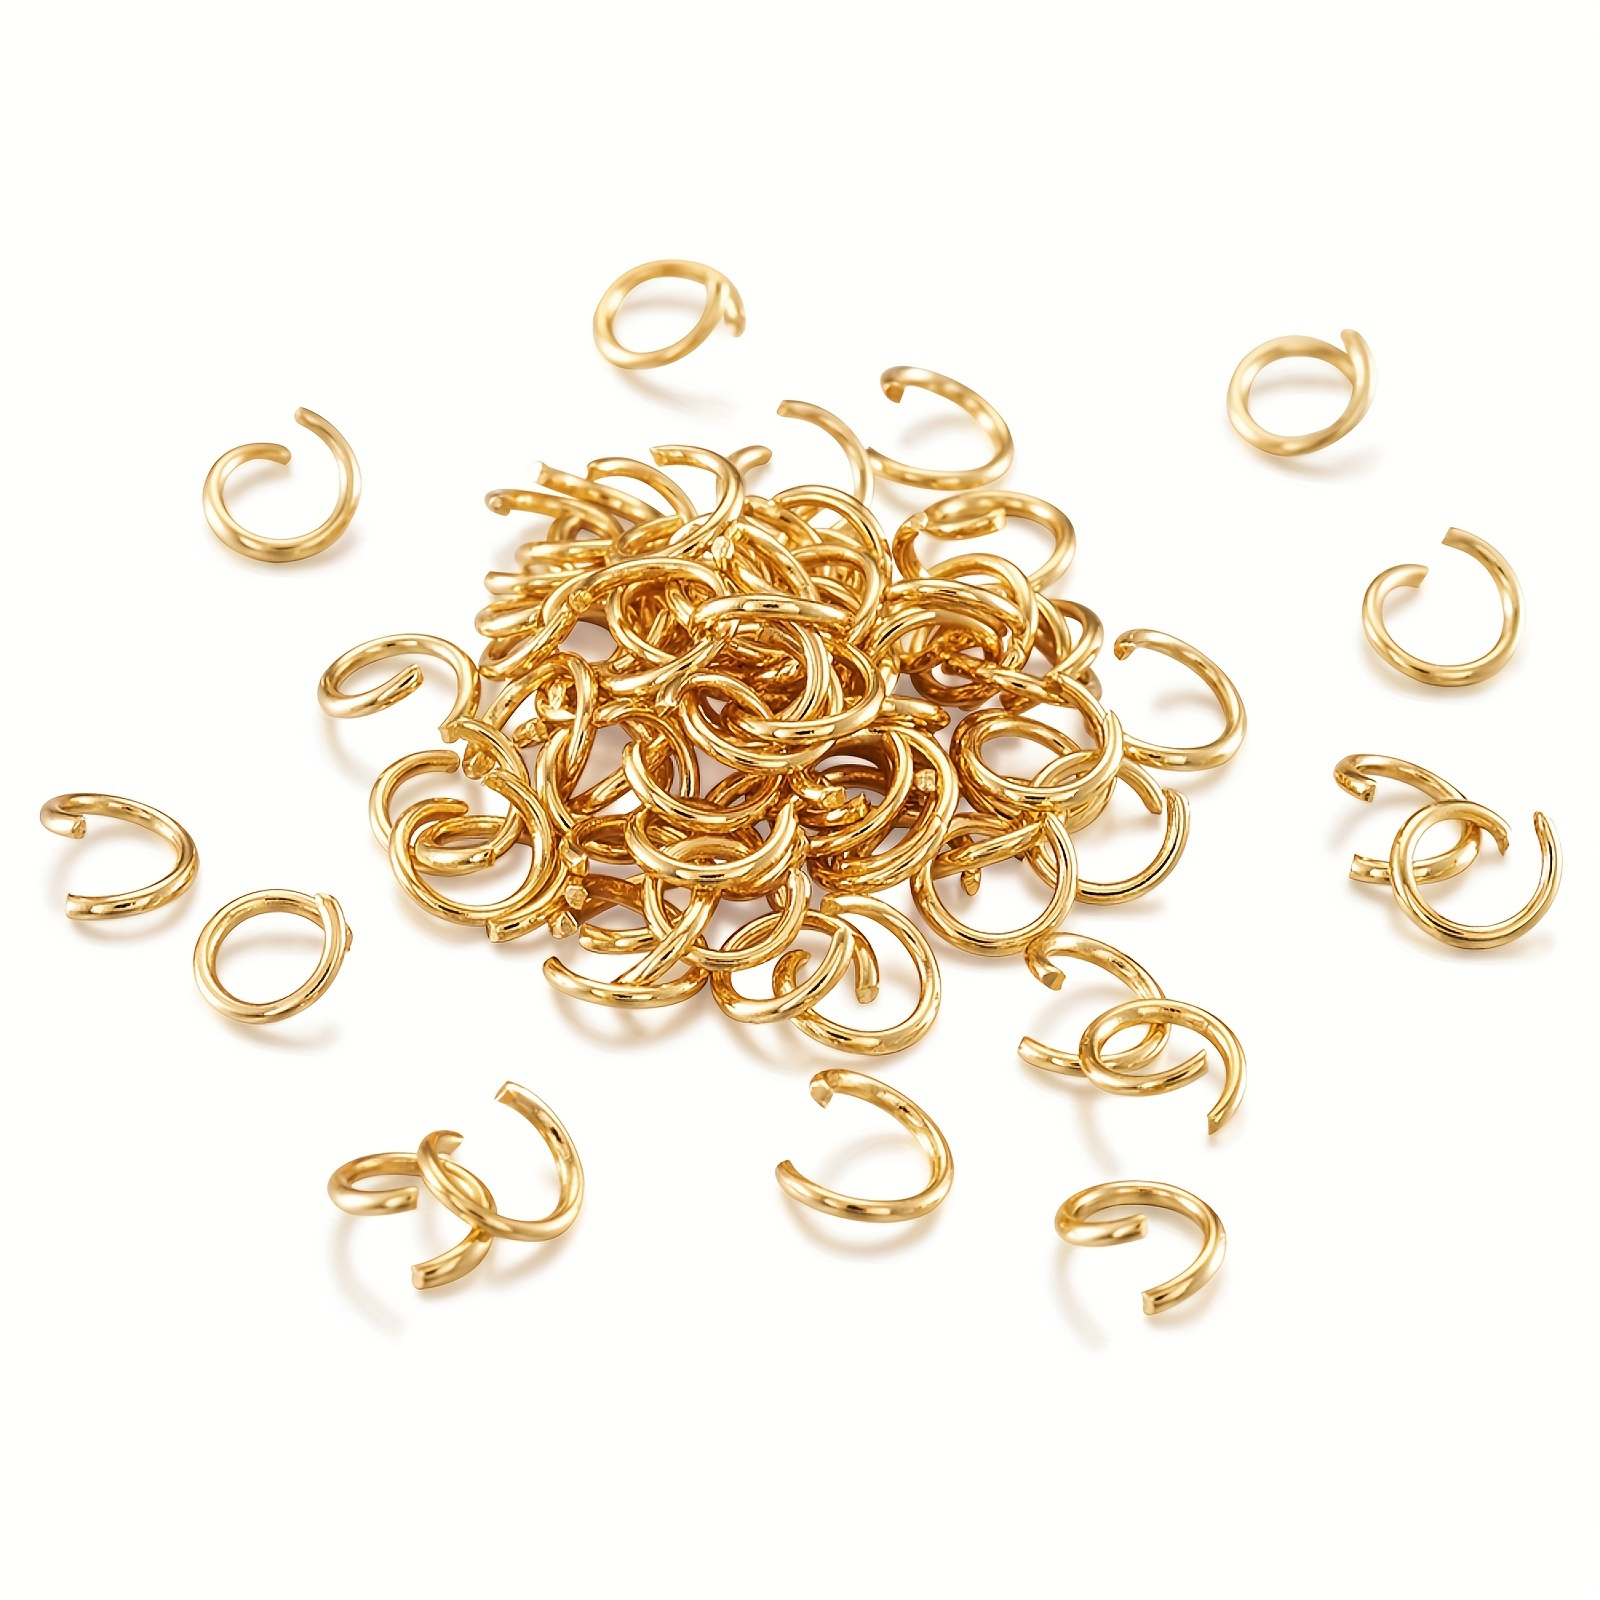 1500pcs Gold Jump Rings for Jewelry Making 4mm Gold Plated Open Jump Rings for Craft Making Supplies